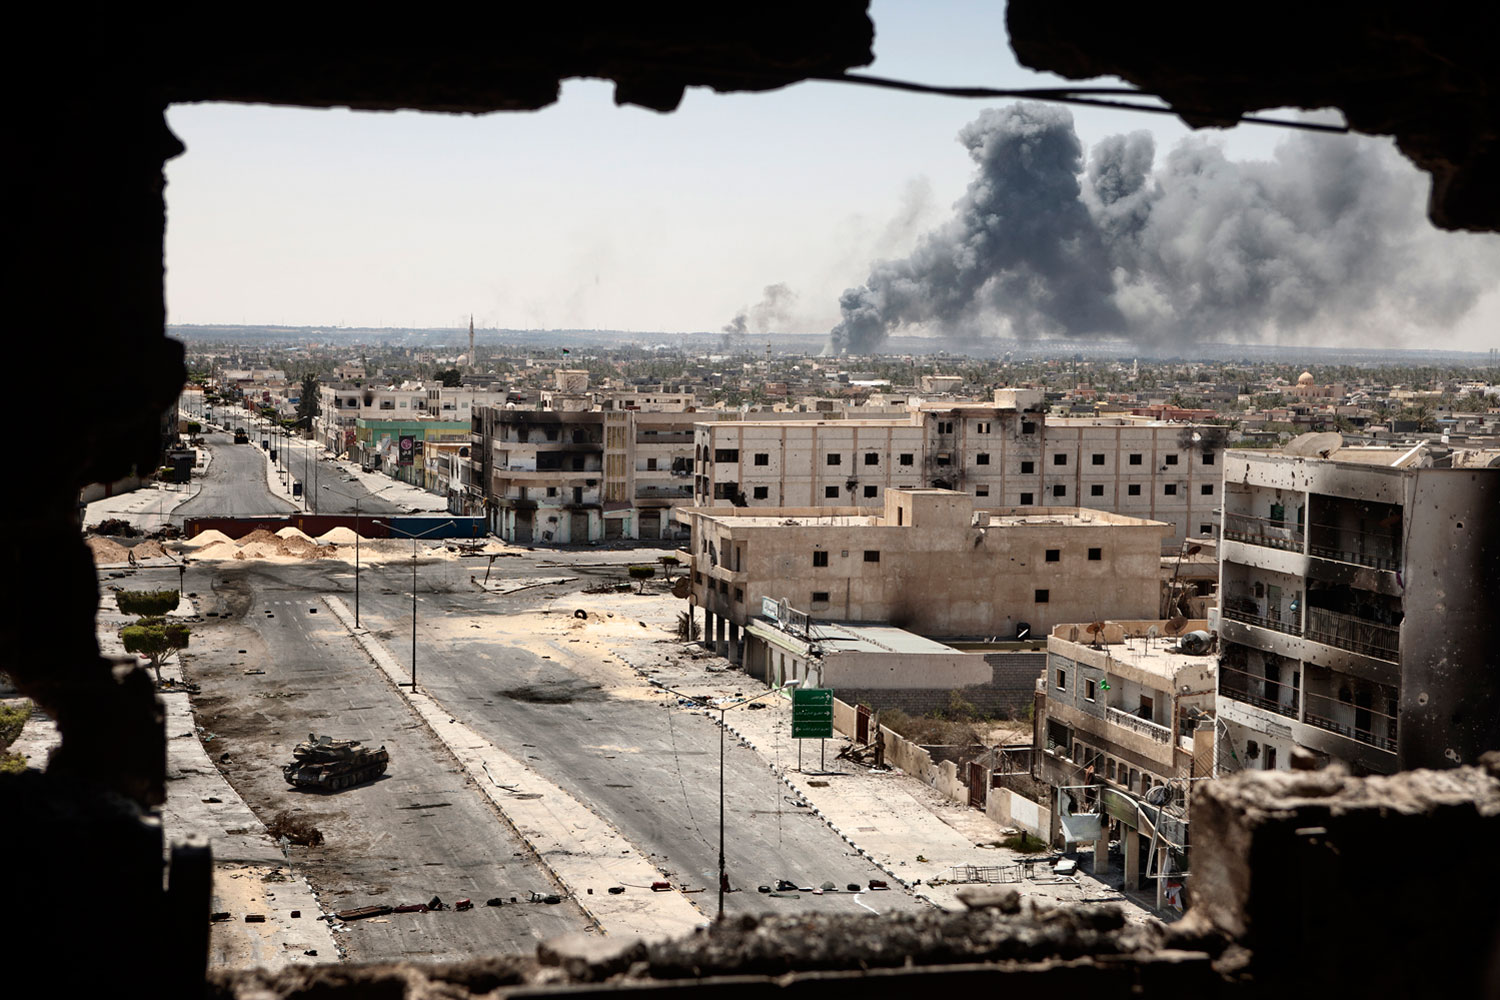 April 29, 2011. Smoke billows from a shoe factory on the frontline near the airport, with the bombed out remains of buildings on Tripoli Street in the foreground, in Misurata.